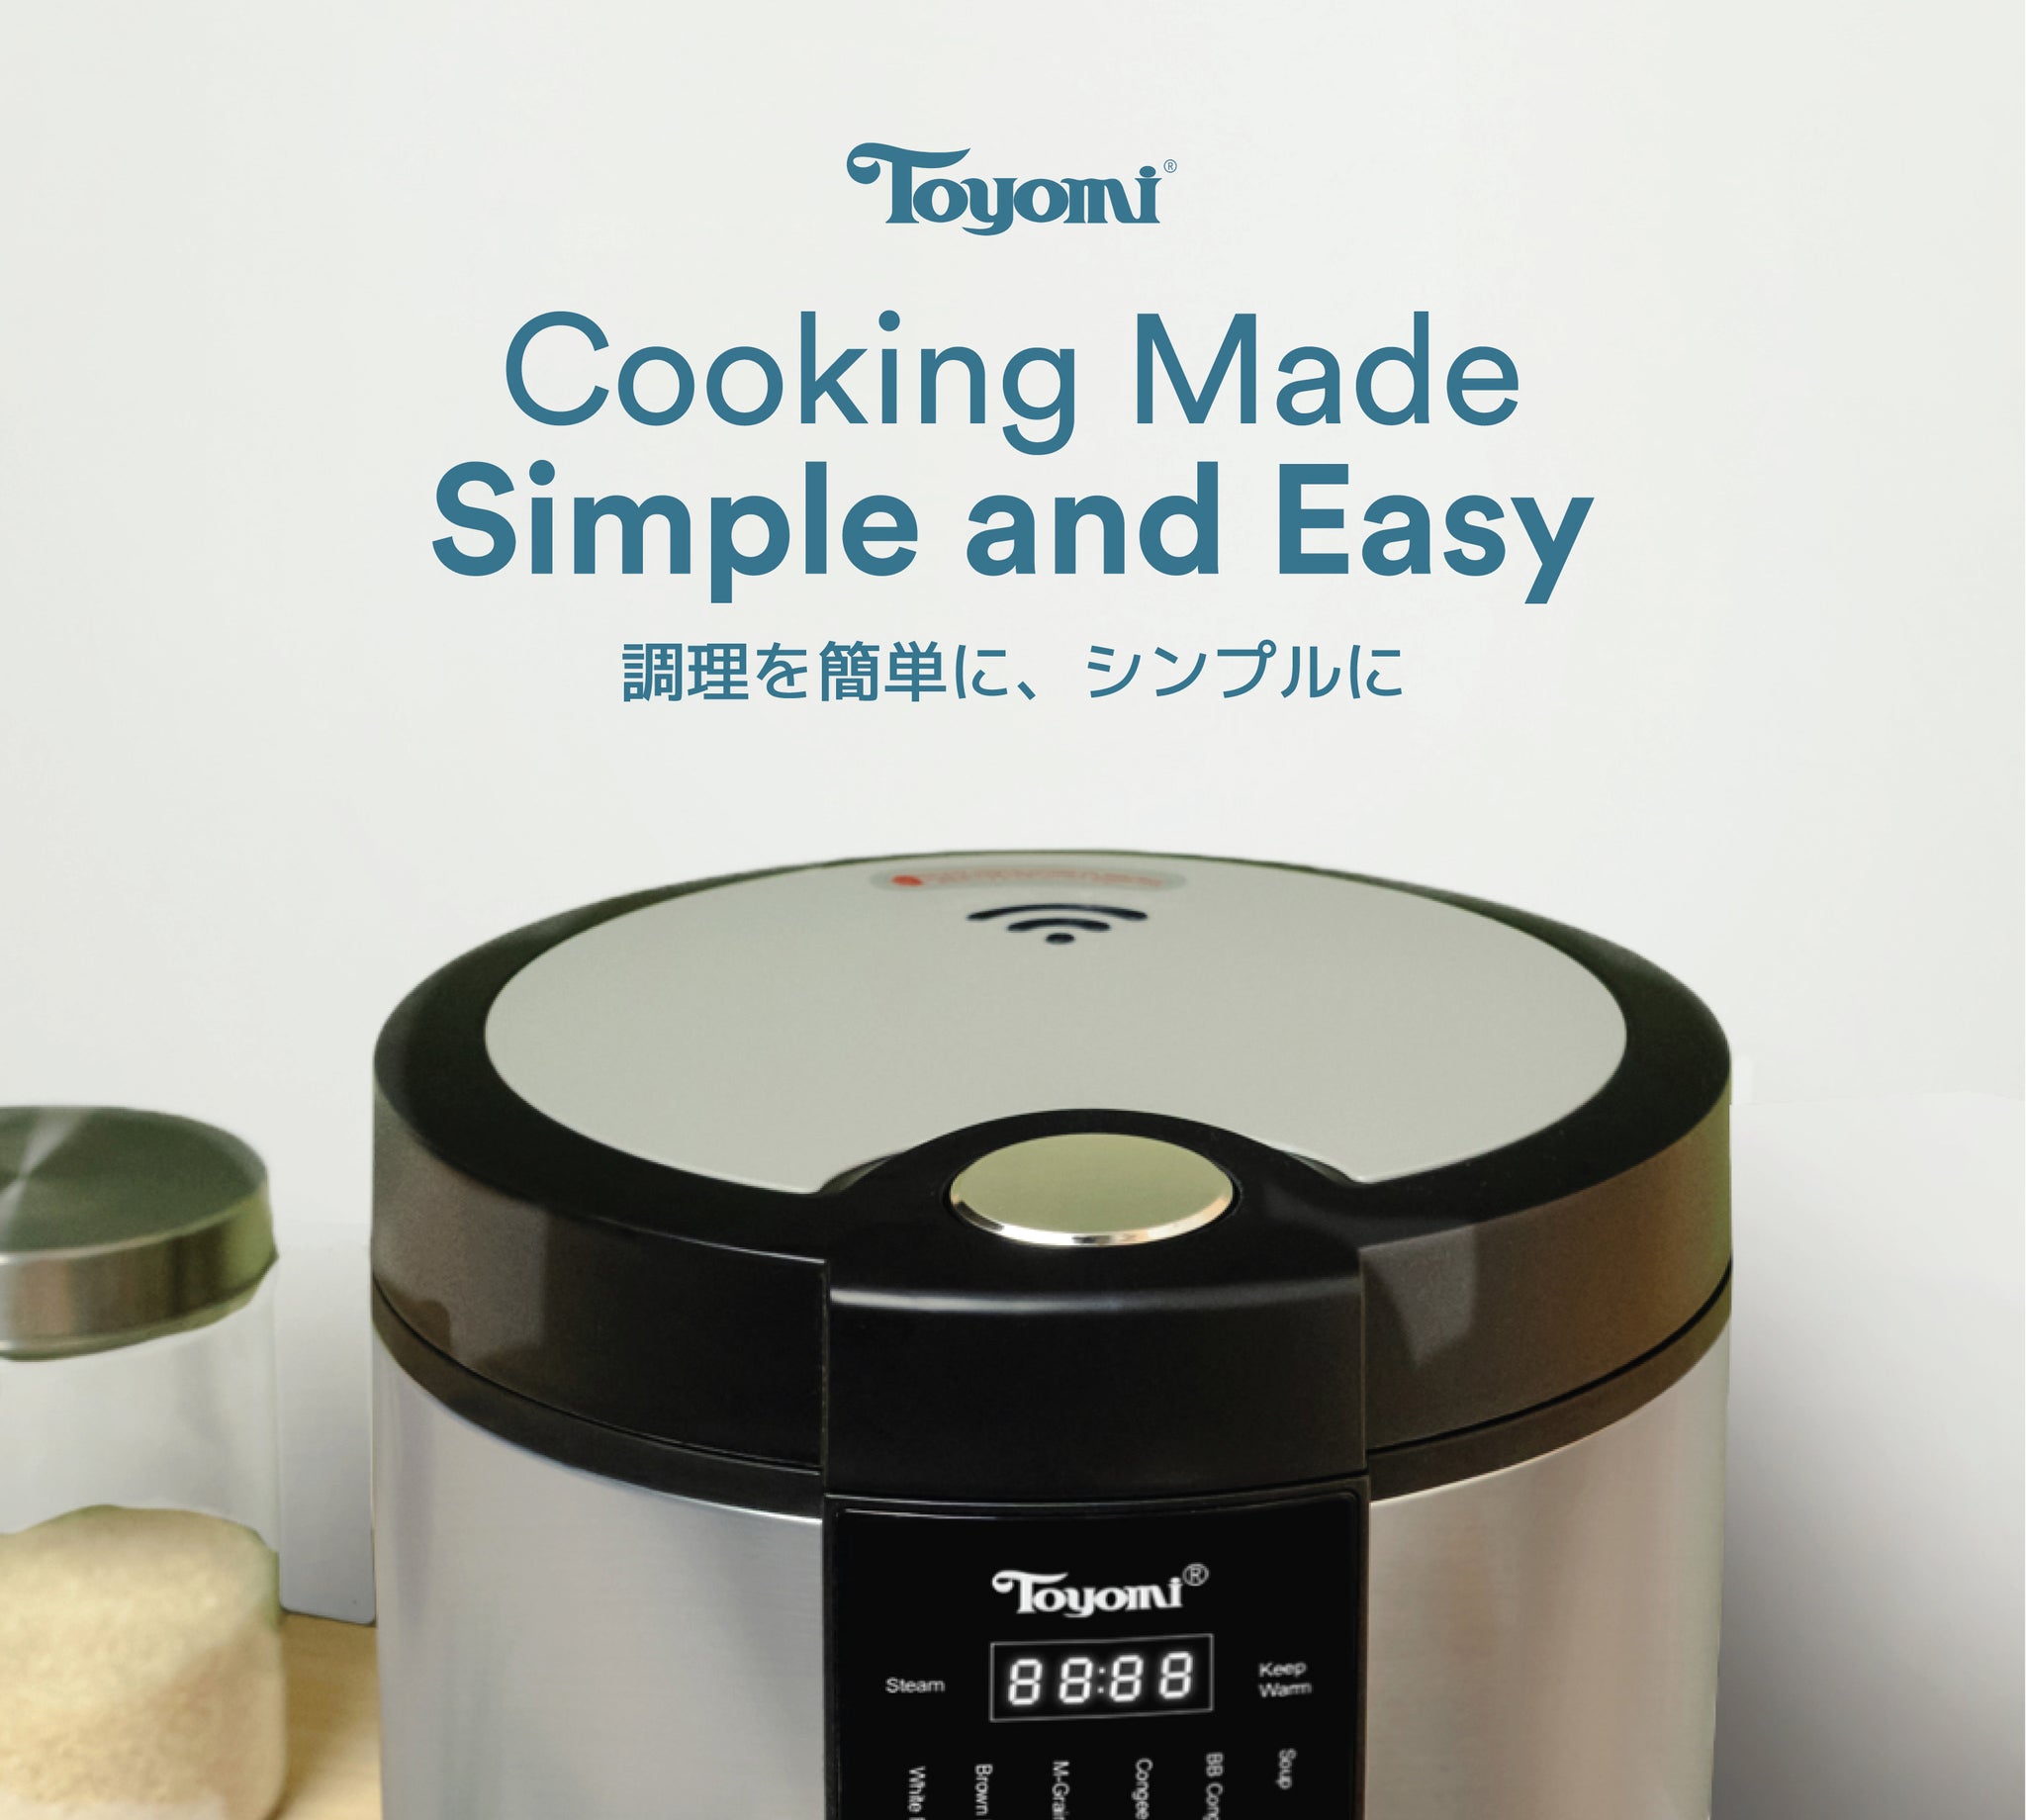 Carb-Reducing Rice Cookers : DietCooker